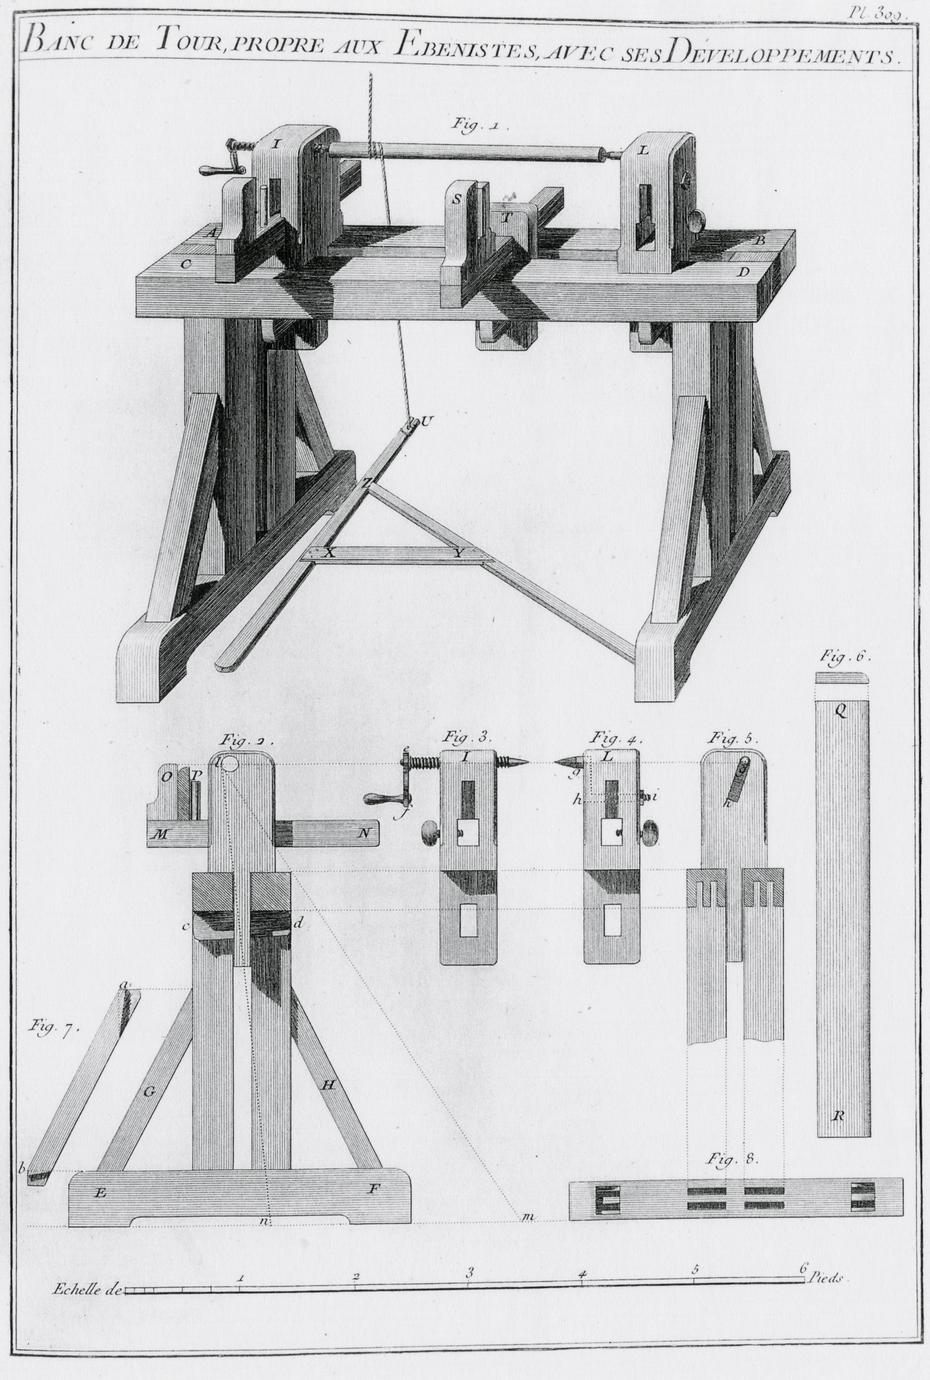 Black and white illustration of a lathe bed suitable for cabinetmakers